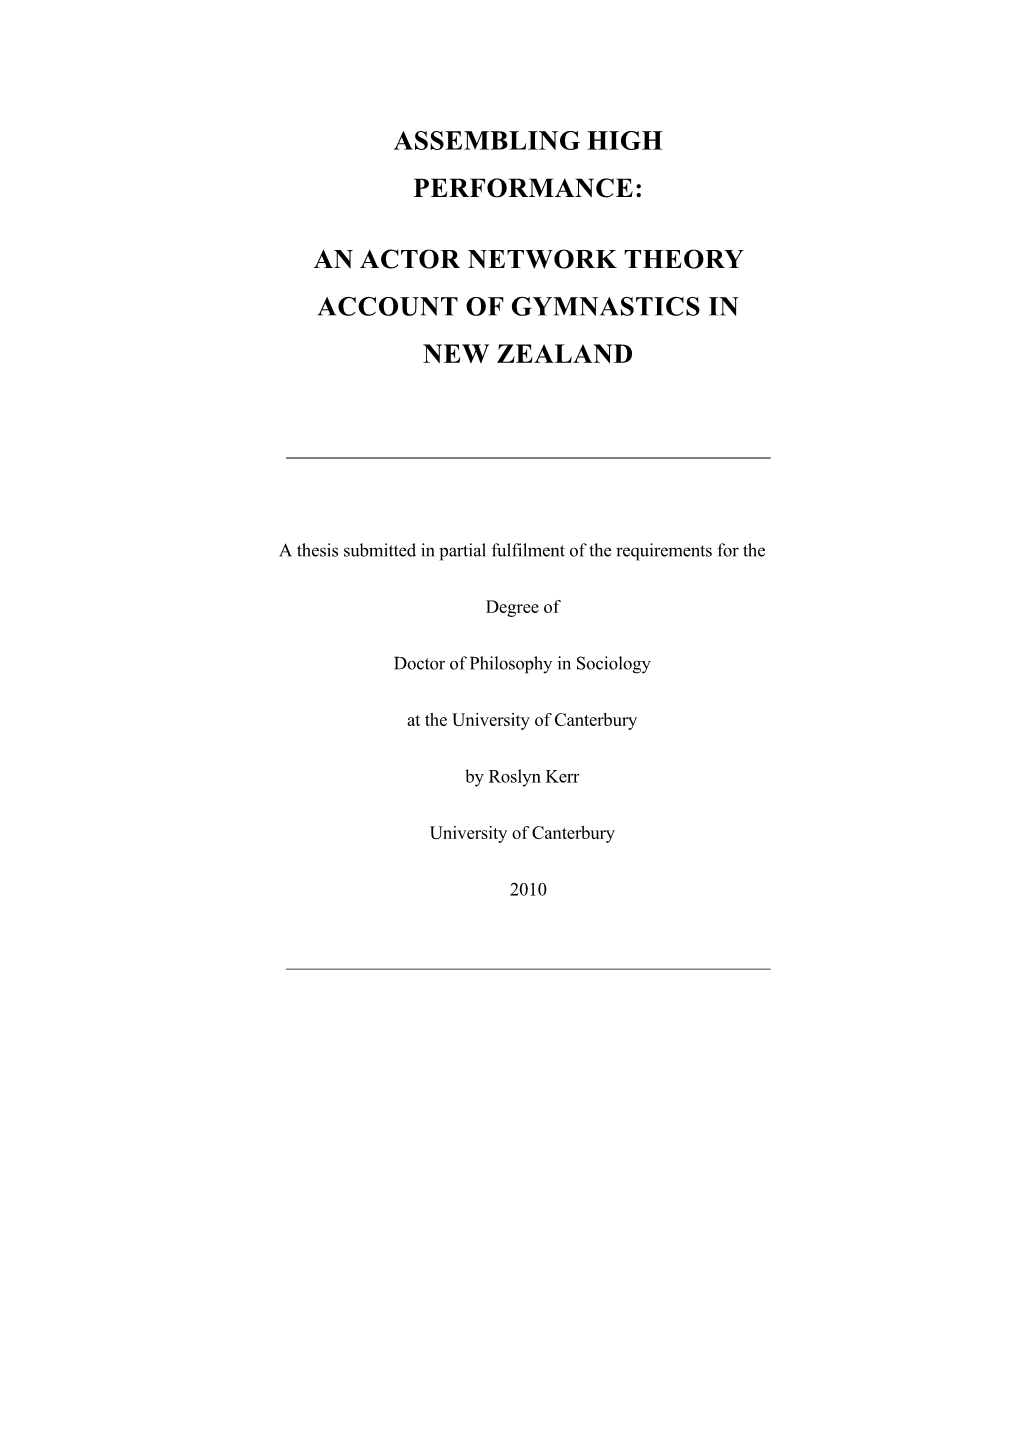 An Actor Network Theory Account of Gymnastics in New Zealand